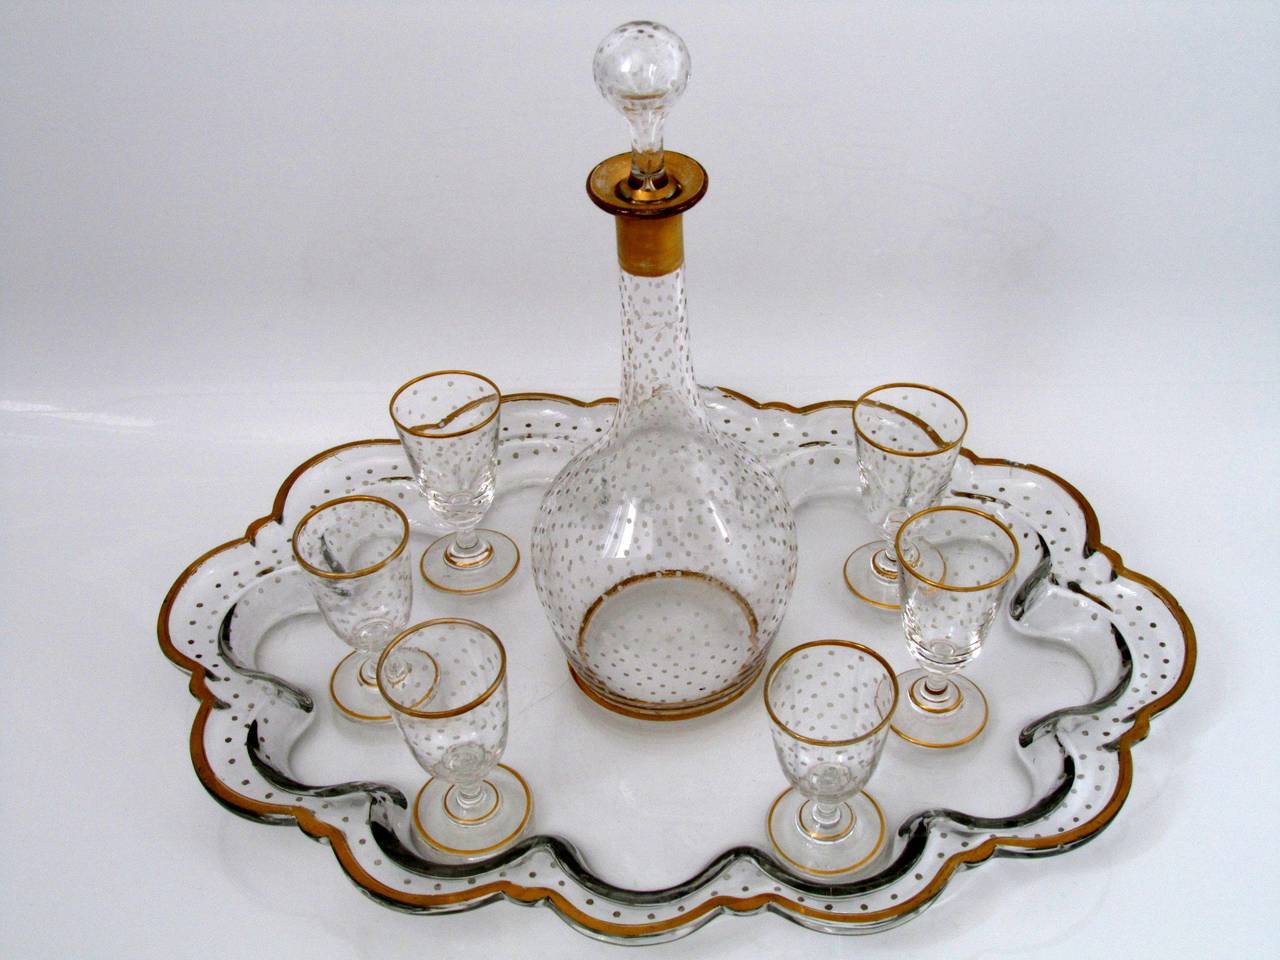 1870s French Gold Enamel Crystal Baccarat Liquor or Aperitif Service 8  pc For Sale 1